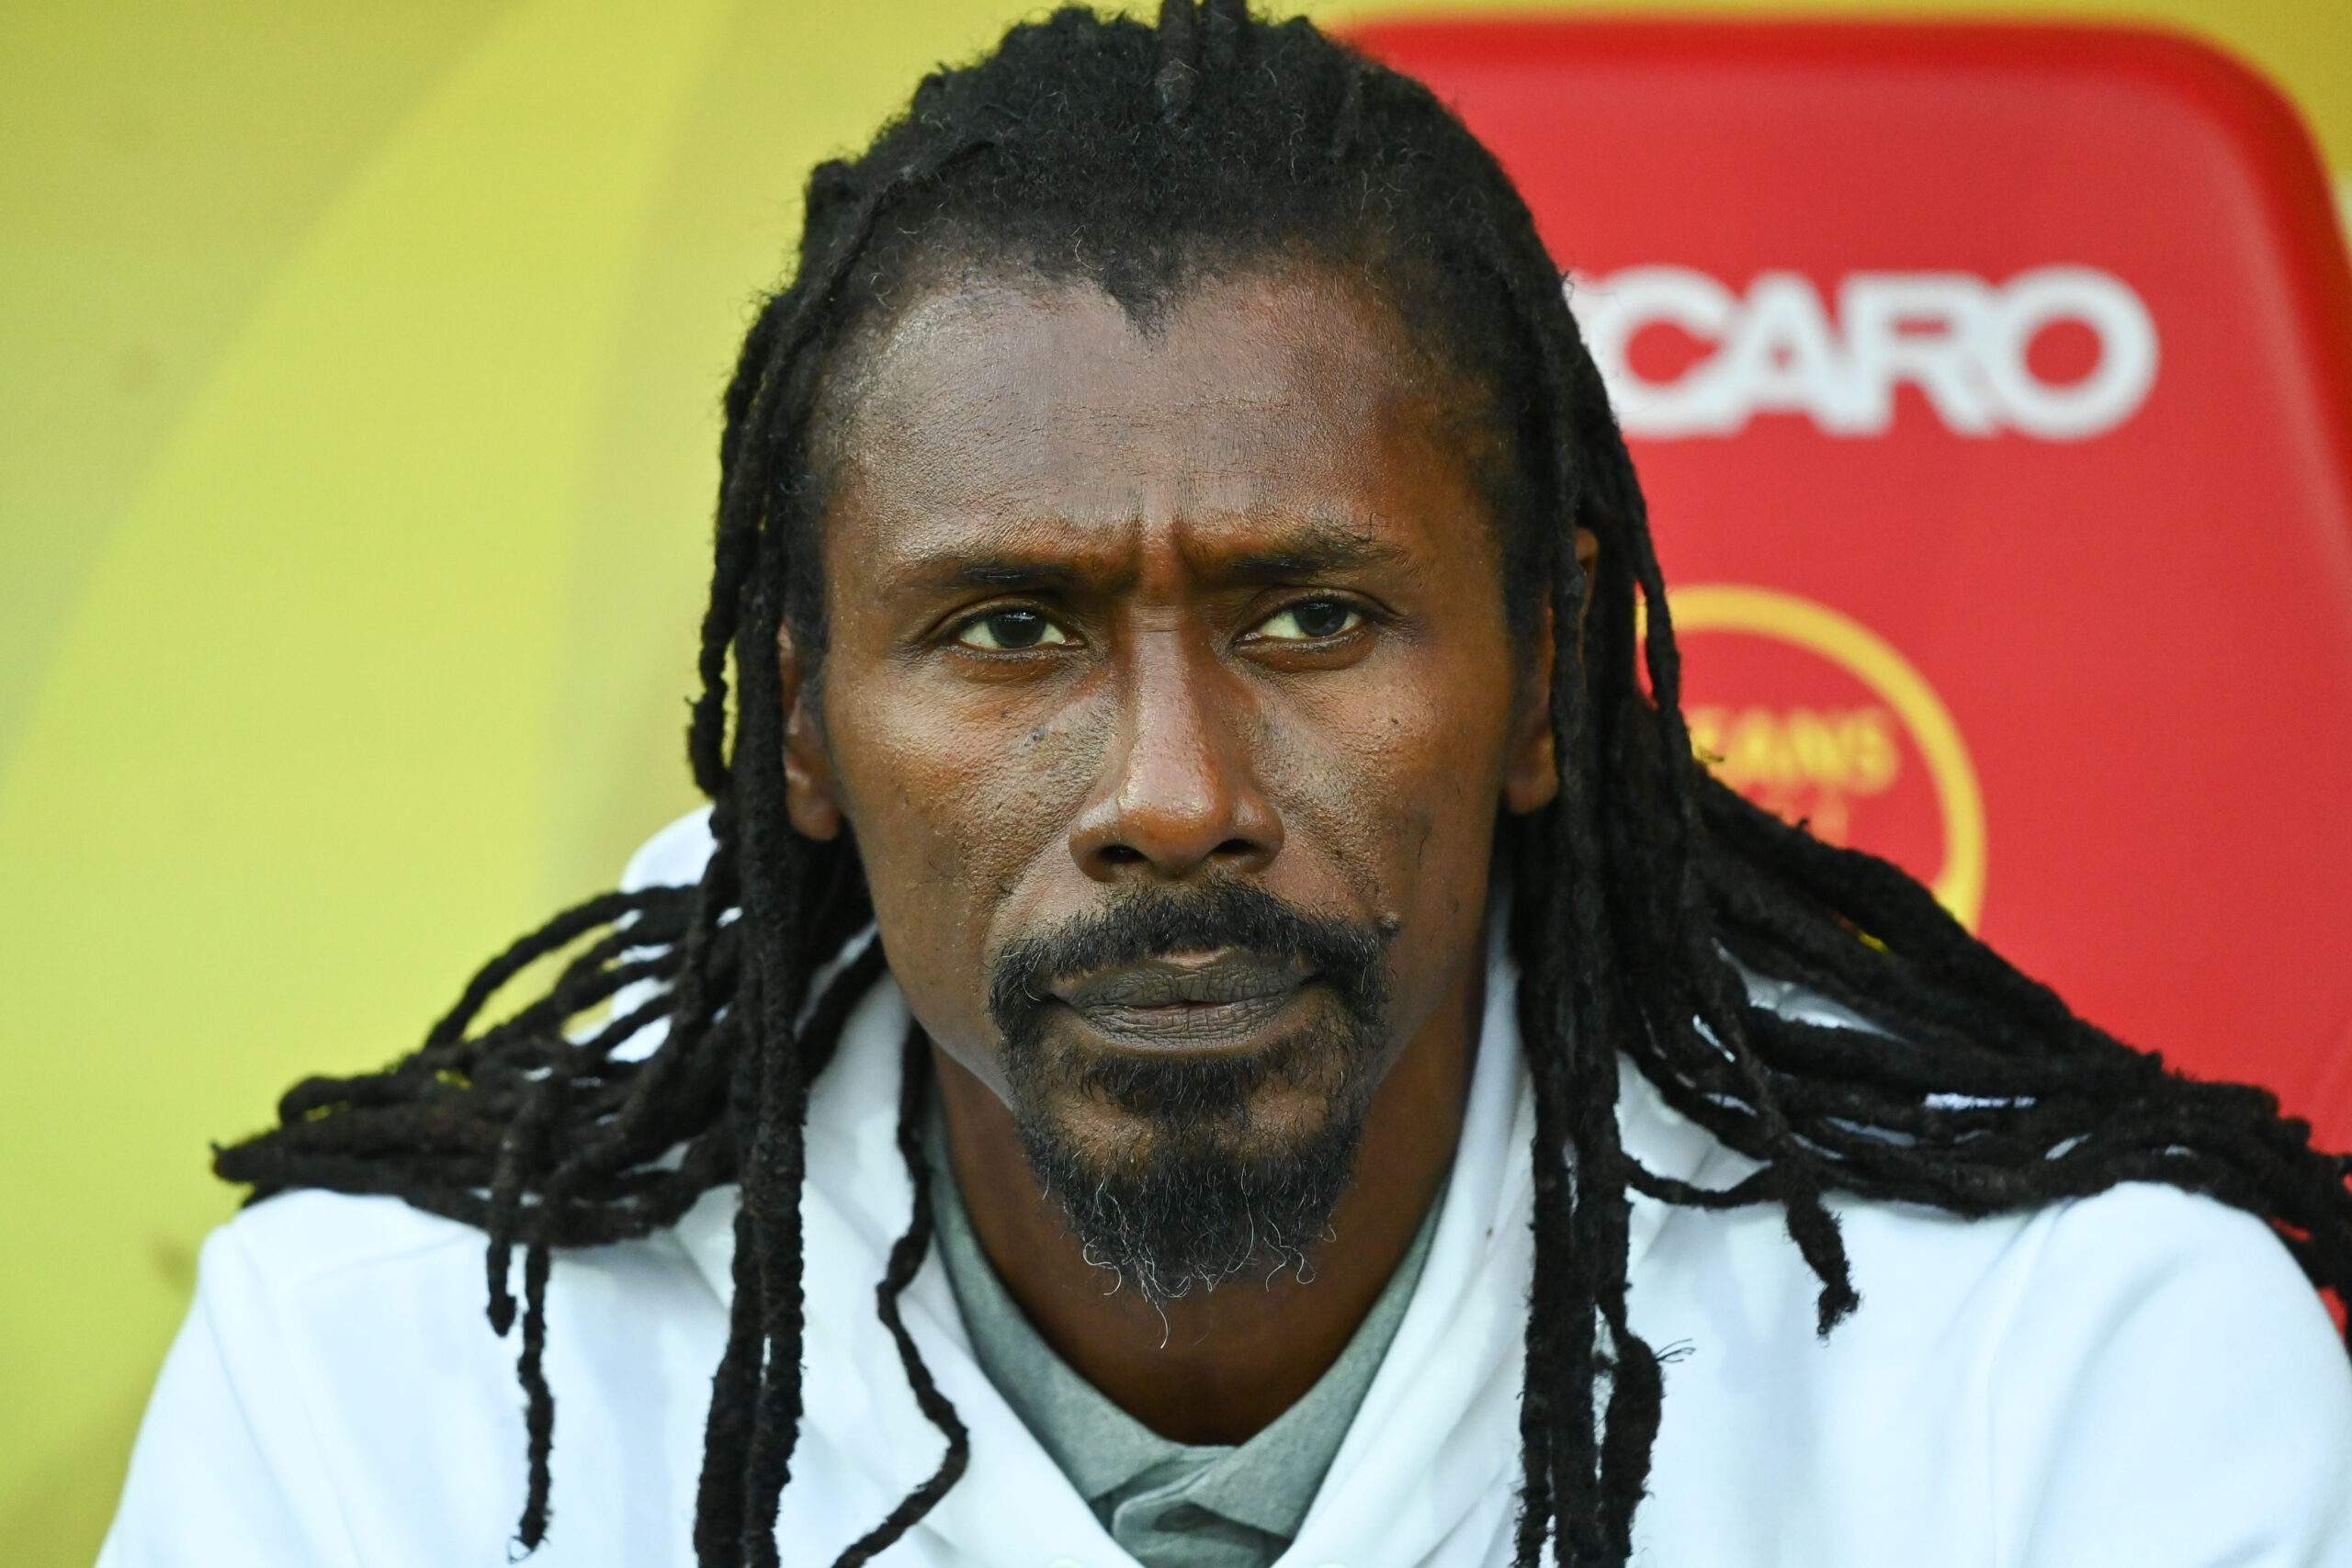 Aliou CISSE coach of Senegal during the International friendly match between Senegal and Bolivia on September 24, 2022 in Orleans, France. (Photo by Anthony Dibon/Icon Sport)<br /> PILKA NOZNA MECZ TOWARZYSKI BOLIWIA - SENEGAL<br /> FOT. ICON SPORT/NEWSPIX.PL<br /> POLAND ONLY!!!<br /> ---<br /> Newspix.pl *** Local Caption *** www.newspix.pl<br /> mail us: info@newspix.pl<br /> call us: 0048 022 23 22 222<br /> ---<br /> Polish Picture Agency by Ringier Axel Springer Poland